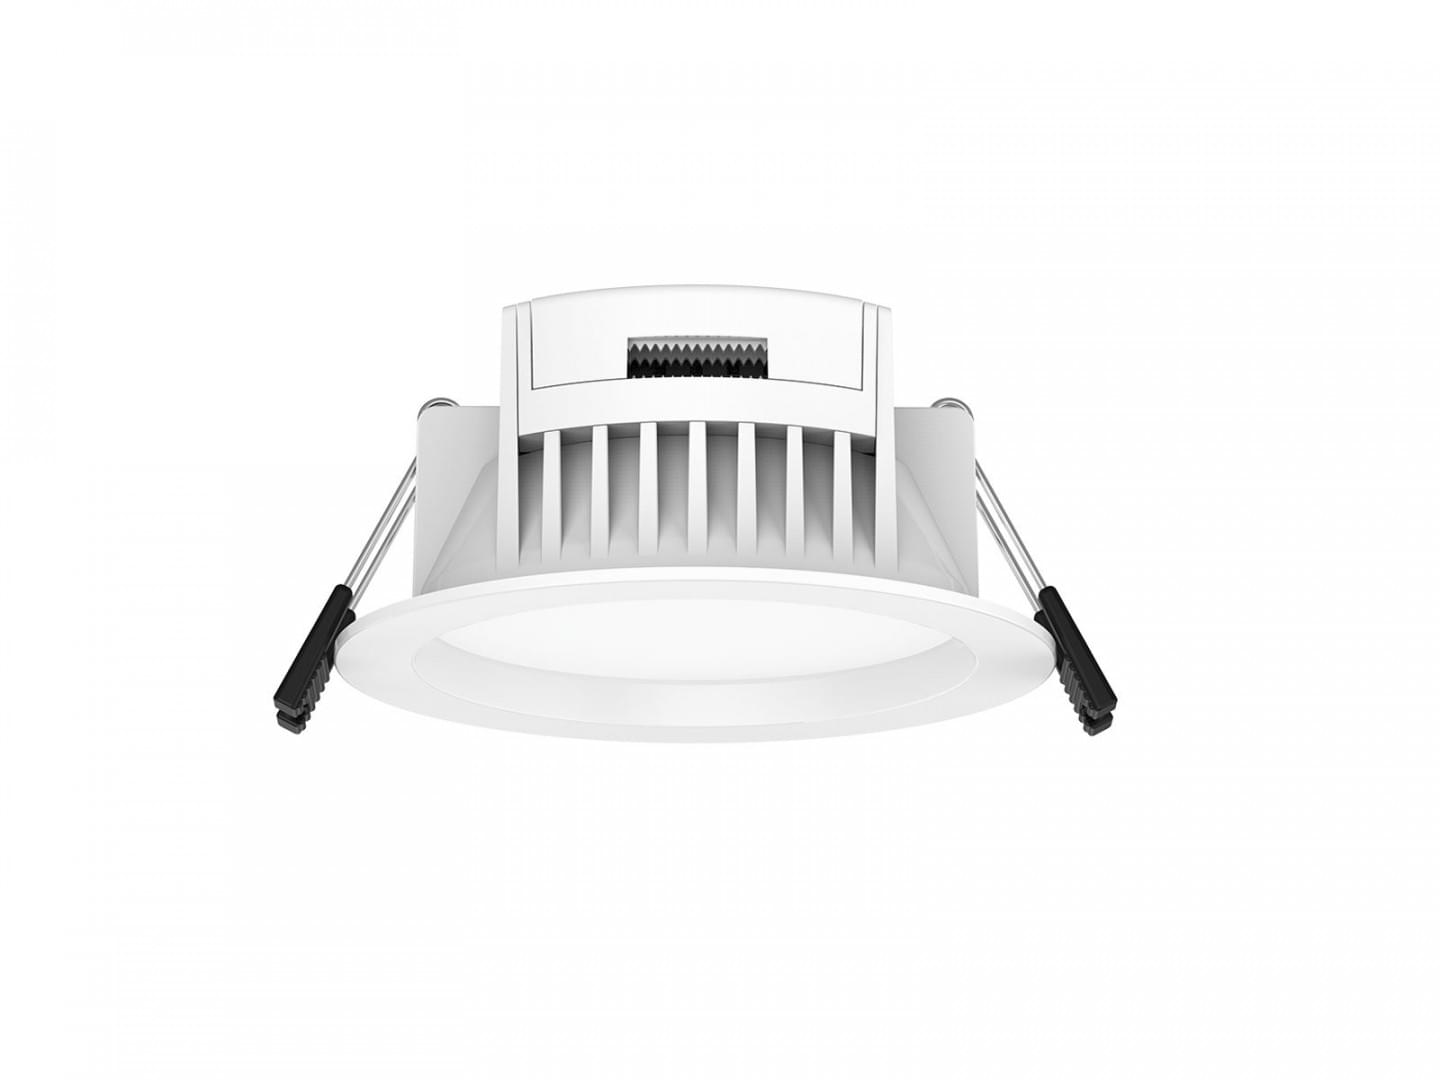 Recessed Down Light NLDL260 Series from NIE Electronics